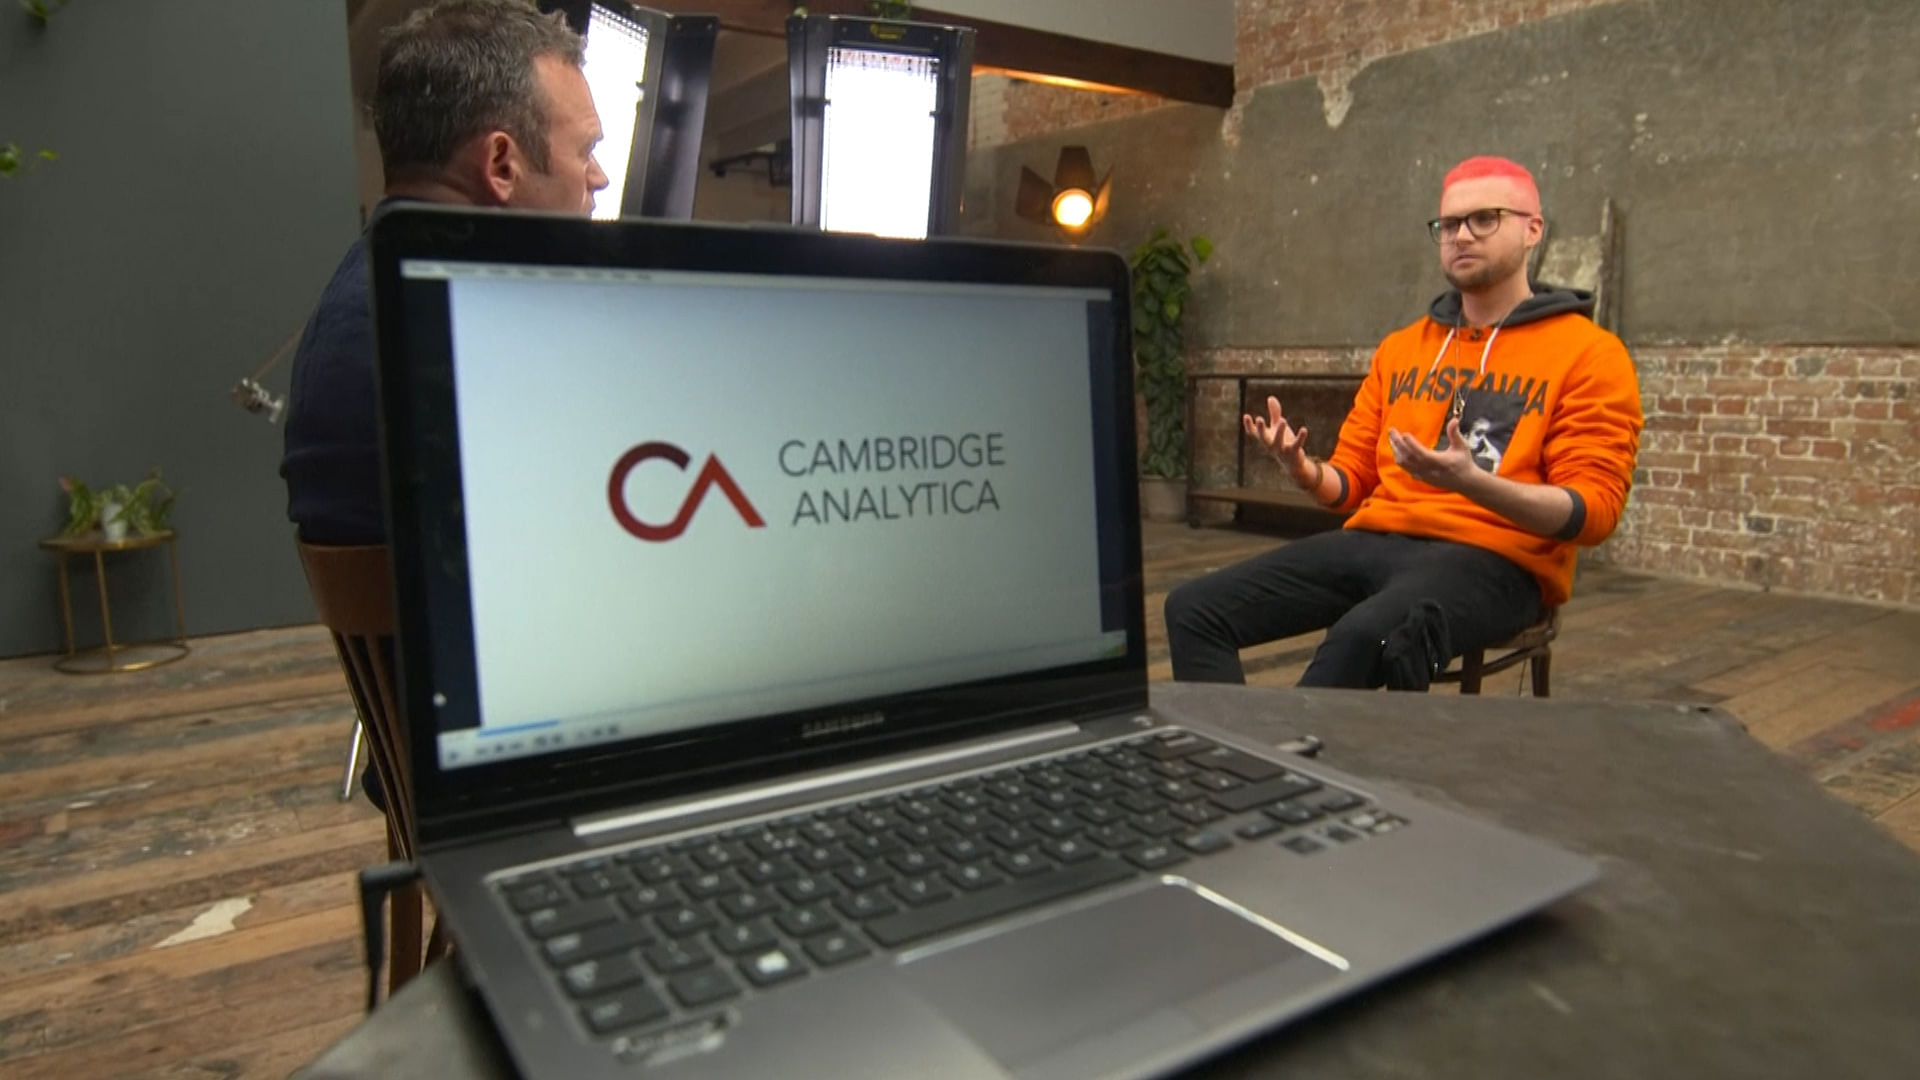 Cambridge Analytica has denied all allegations, claiming that they do not report false or fake news.